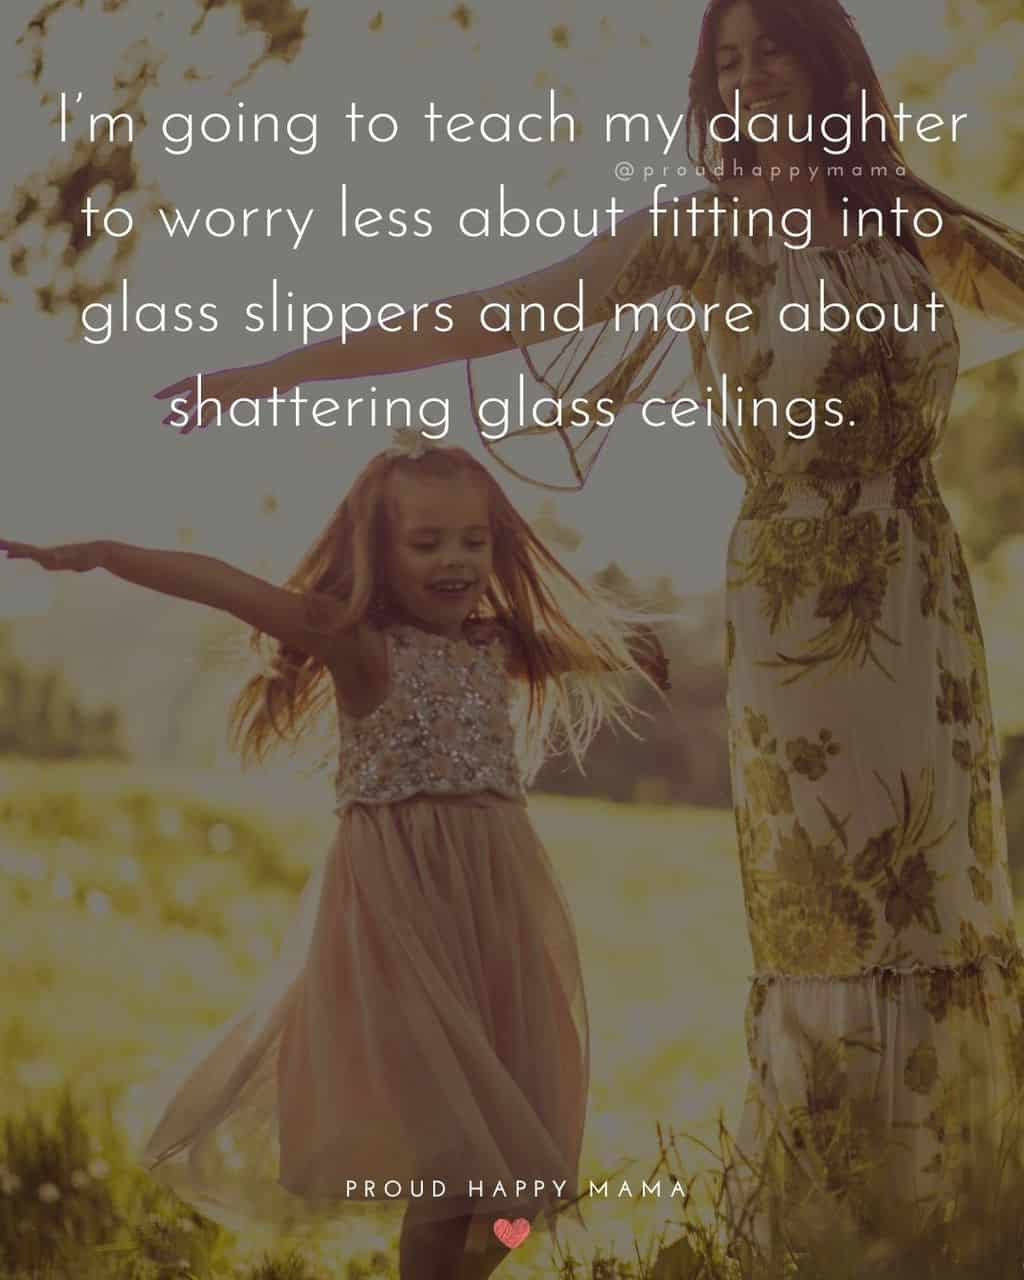 best daughter quotes - ‘I’m going to teach my daughter to worry less about fitting into glass slippers and more about shattering glass